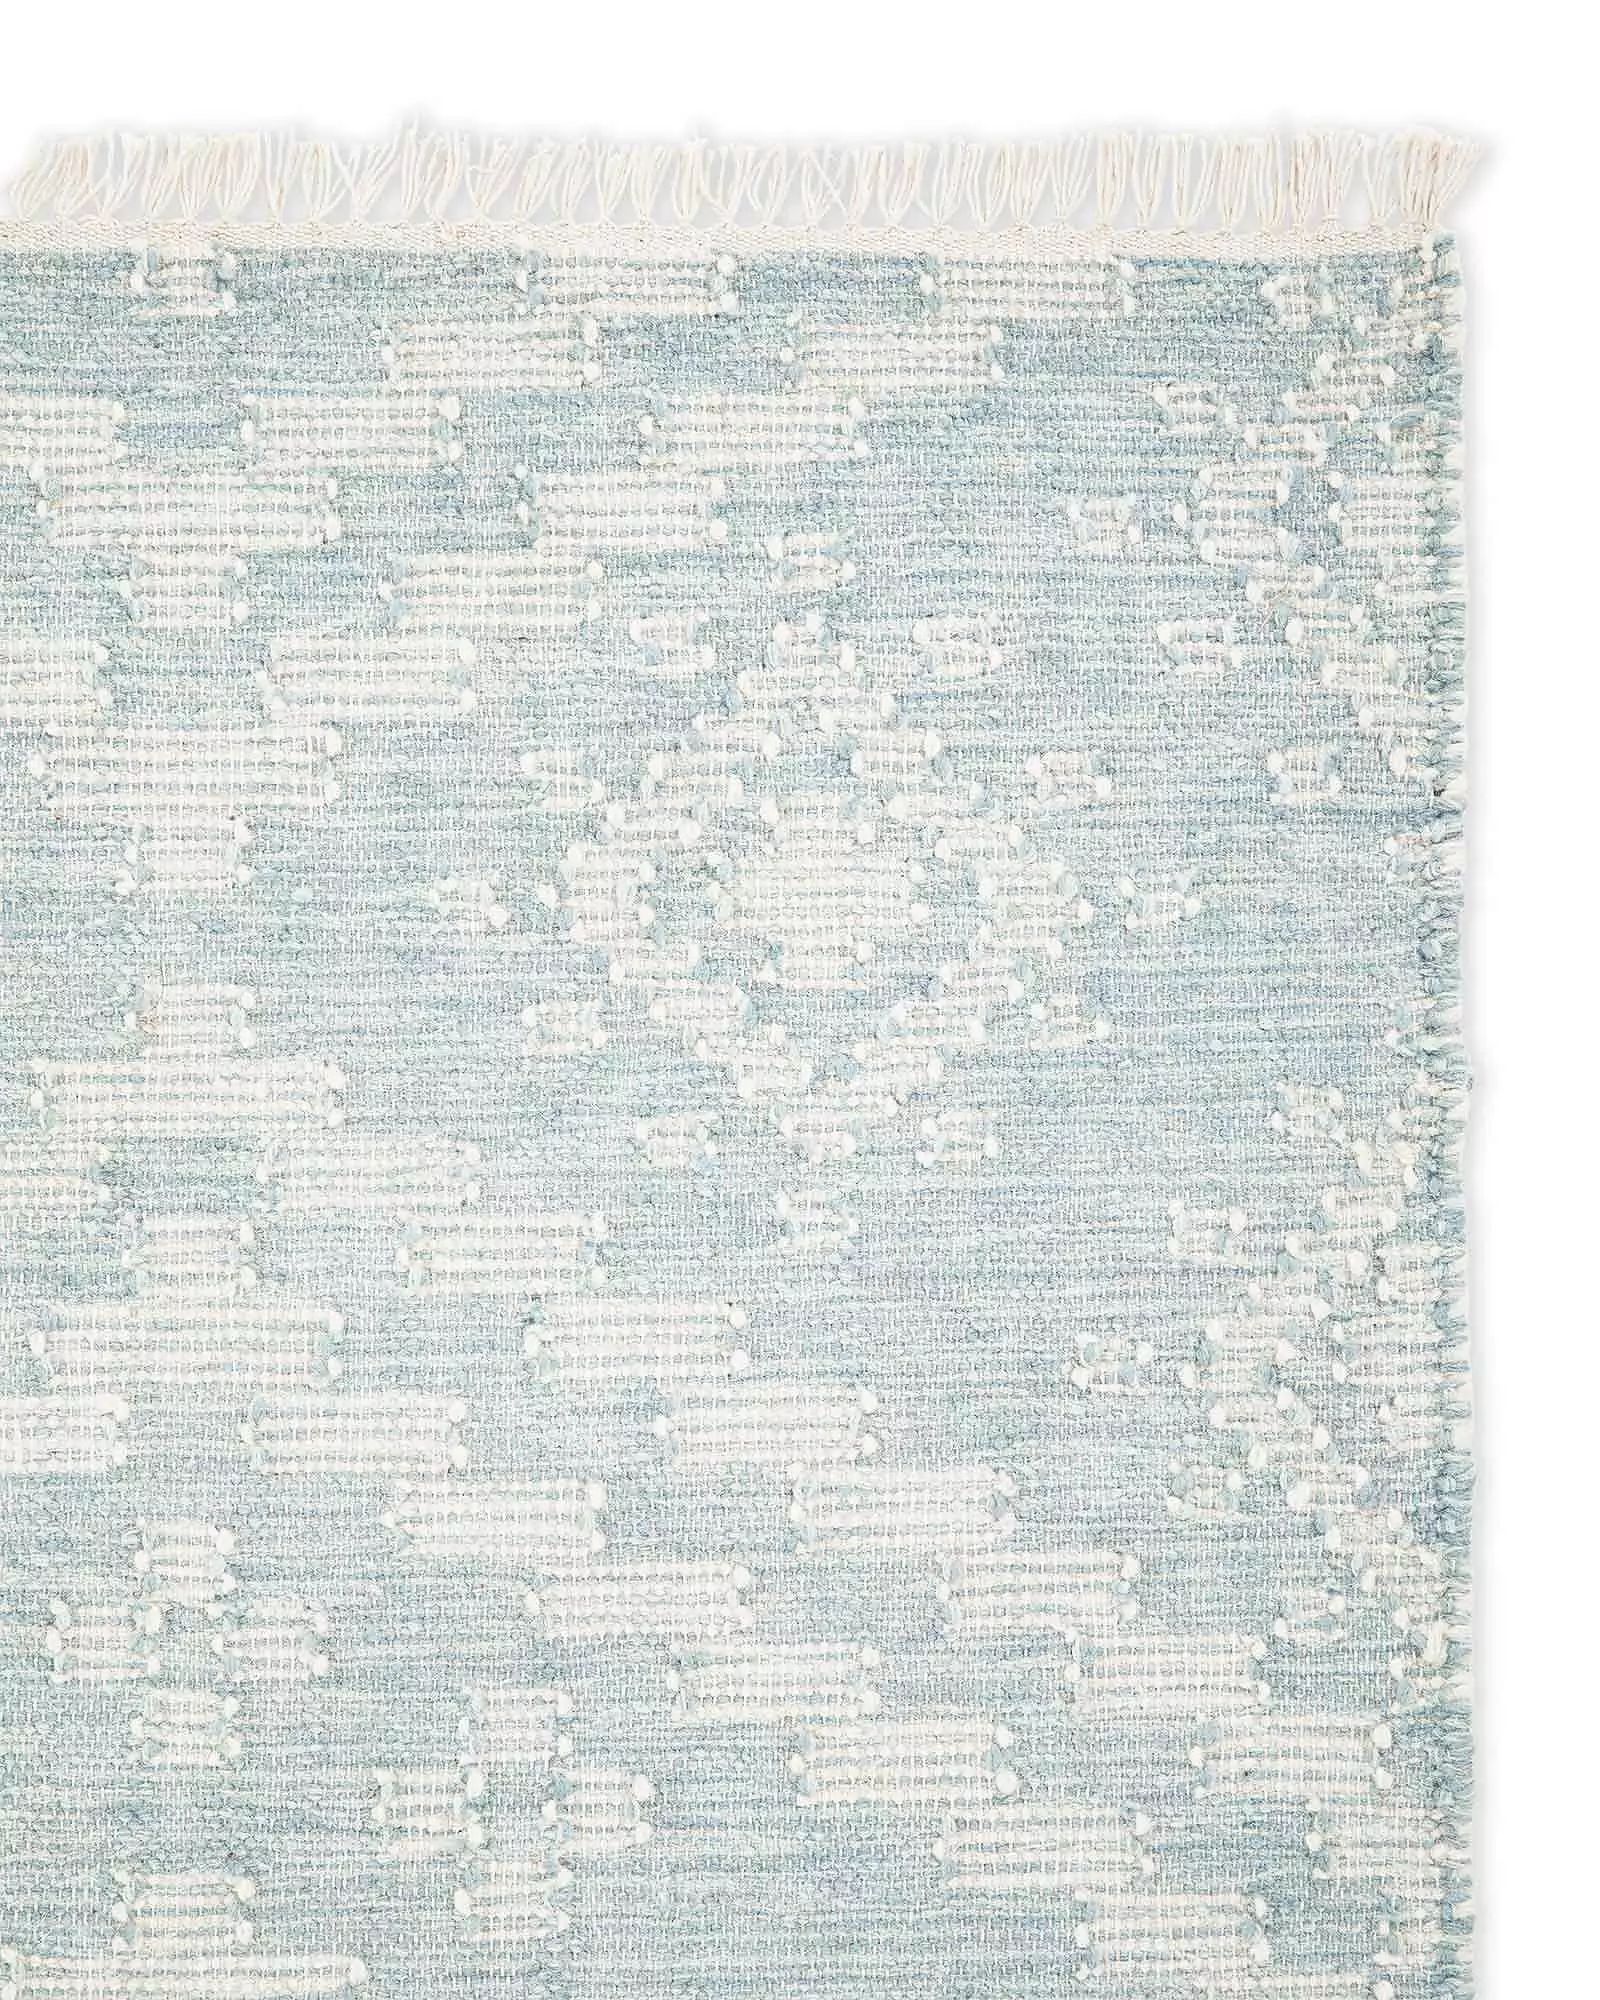 Blakely Rug | Serena and Lily